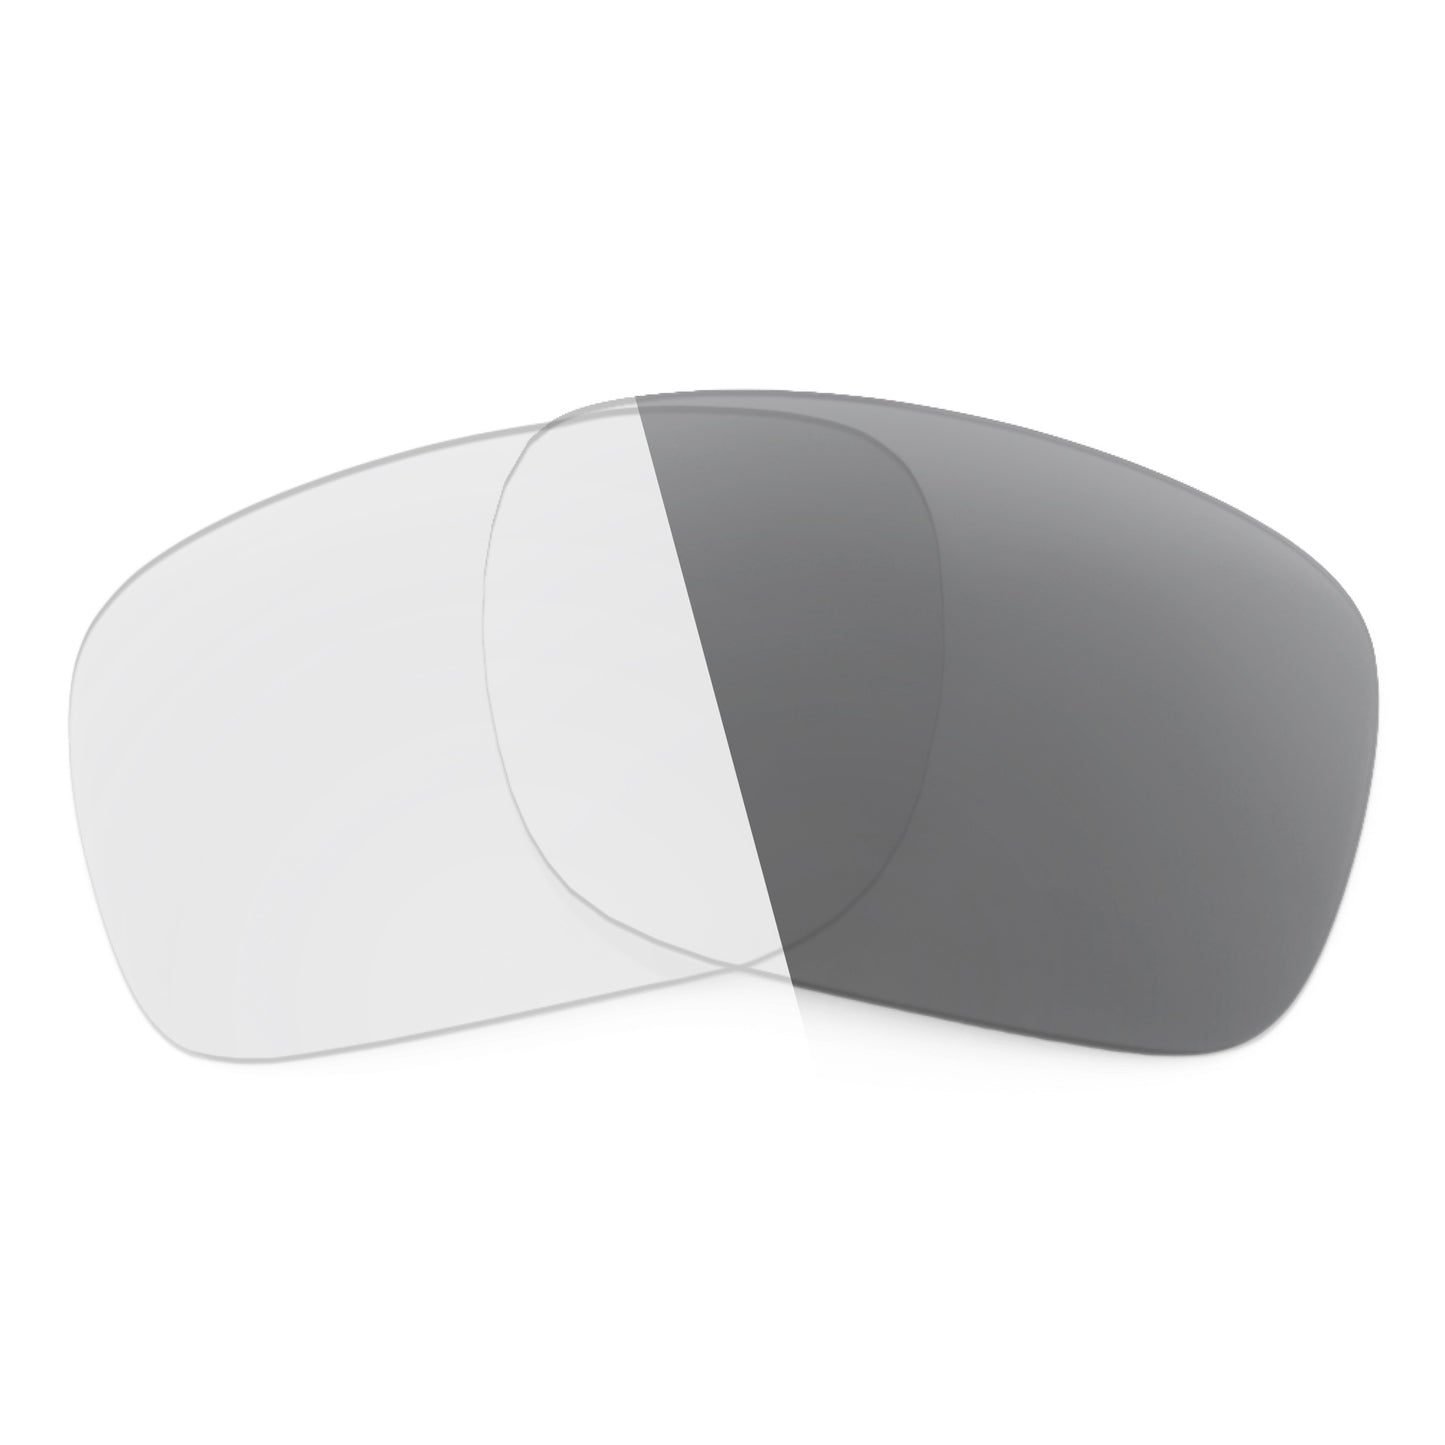 Revant replacement lenses for Ray-Ban RB4264 58mm Non-Polarized Adapt Gray Photochromic